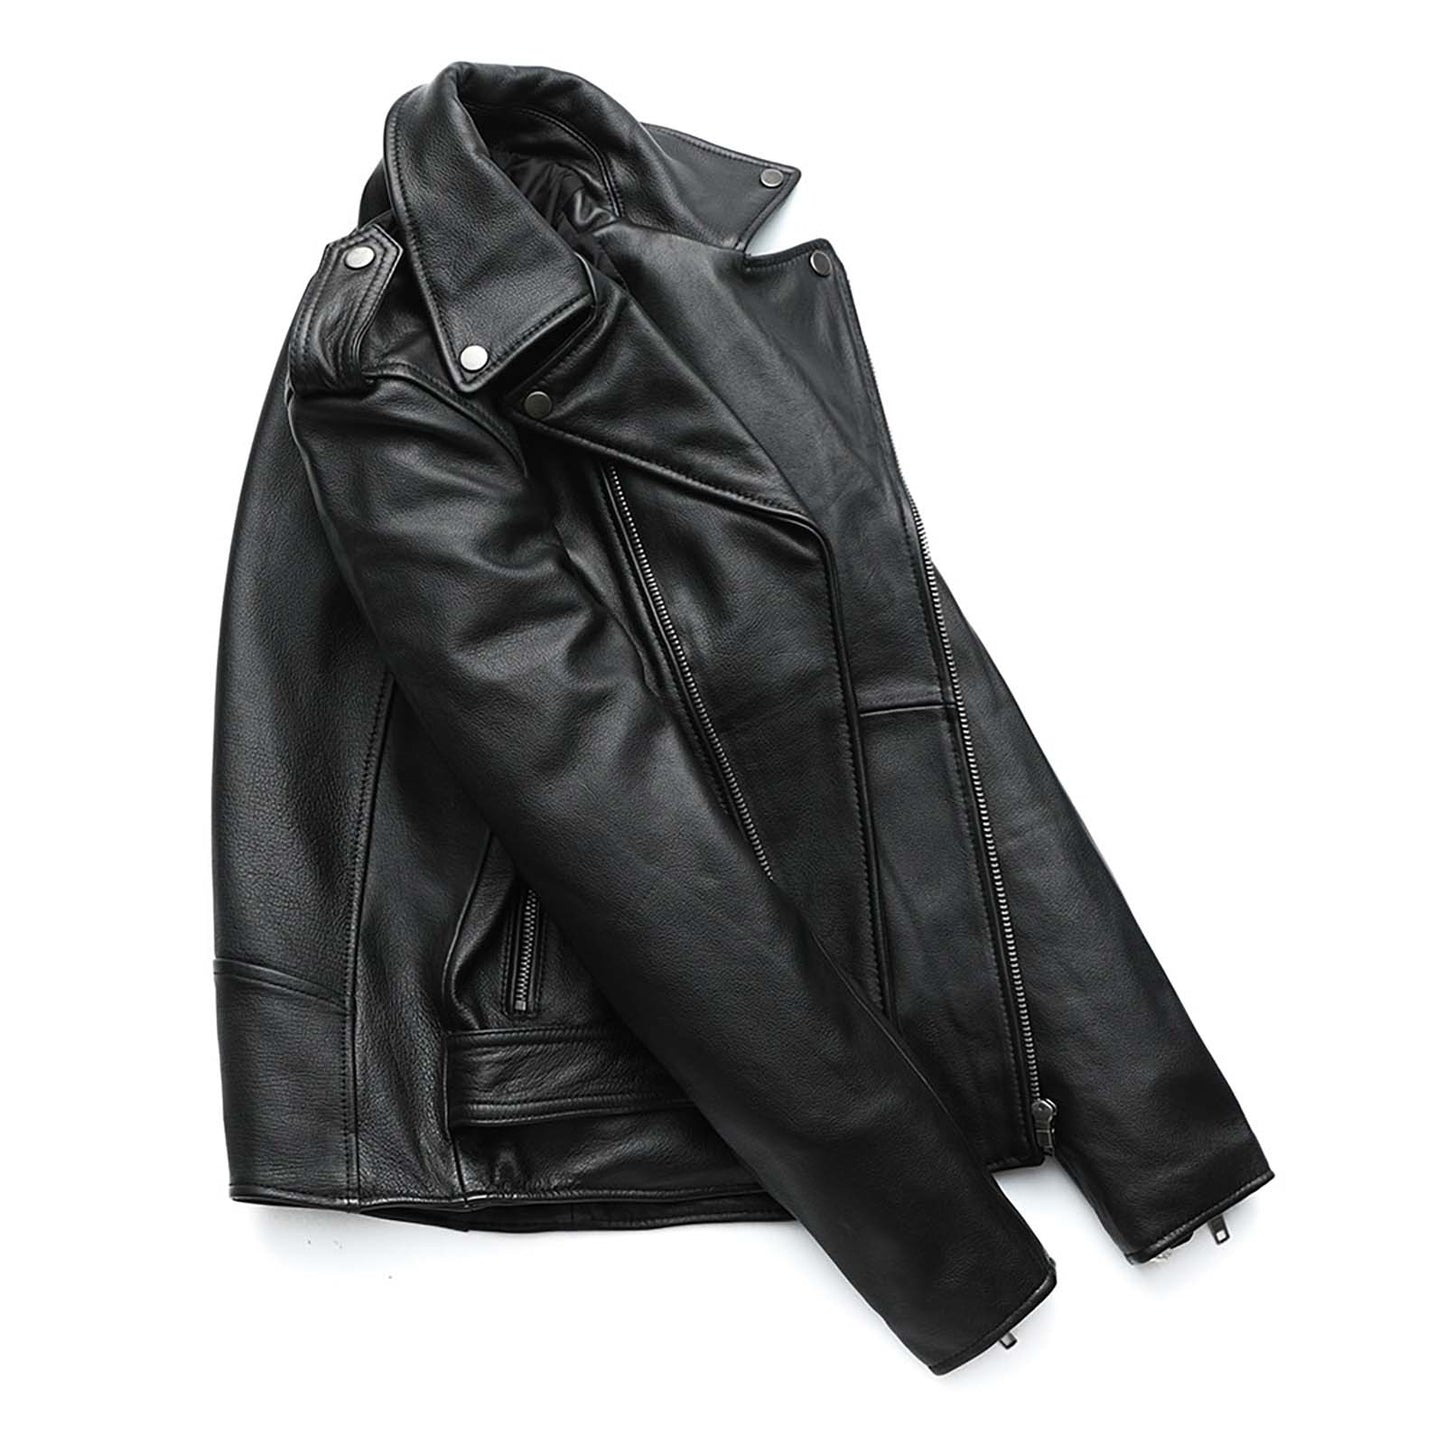 Classical Motorcycle Jacket